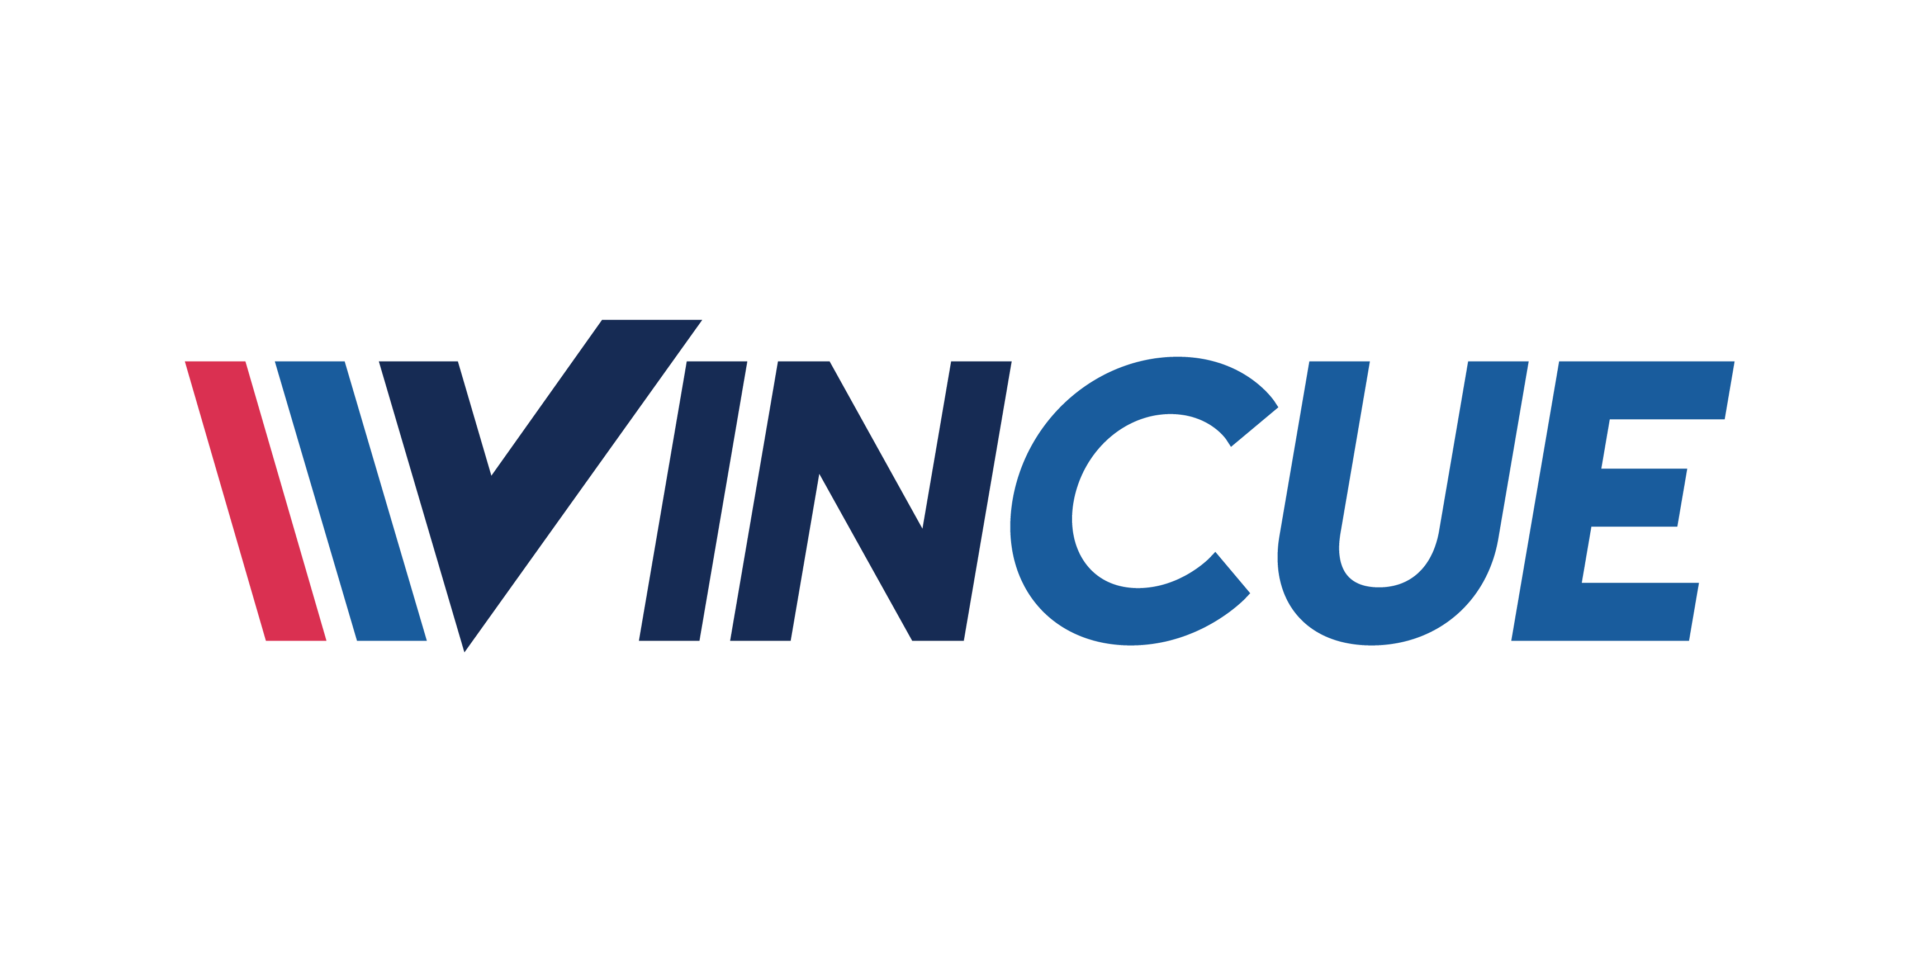 VinCue Wants To Help You Sell More Cars and Make More Money